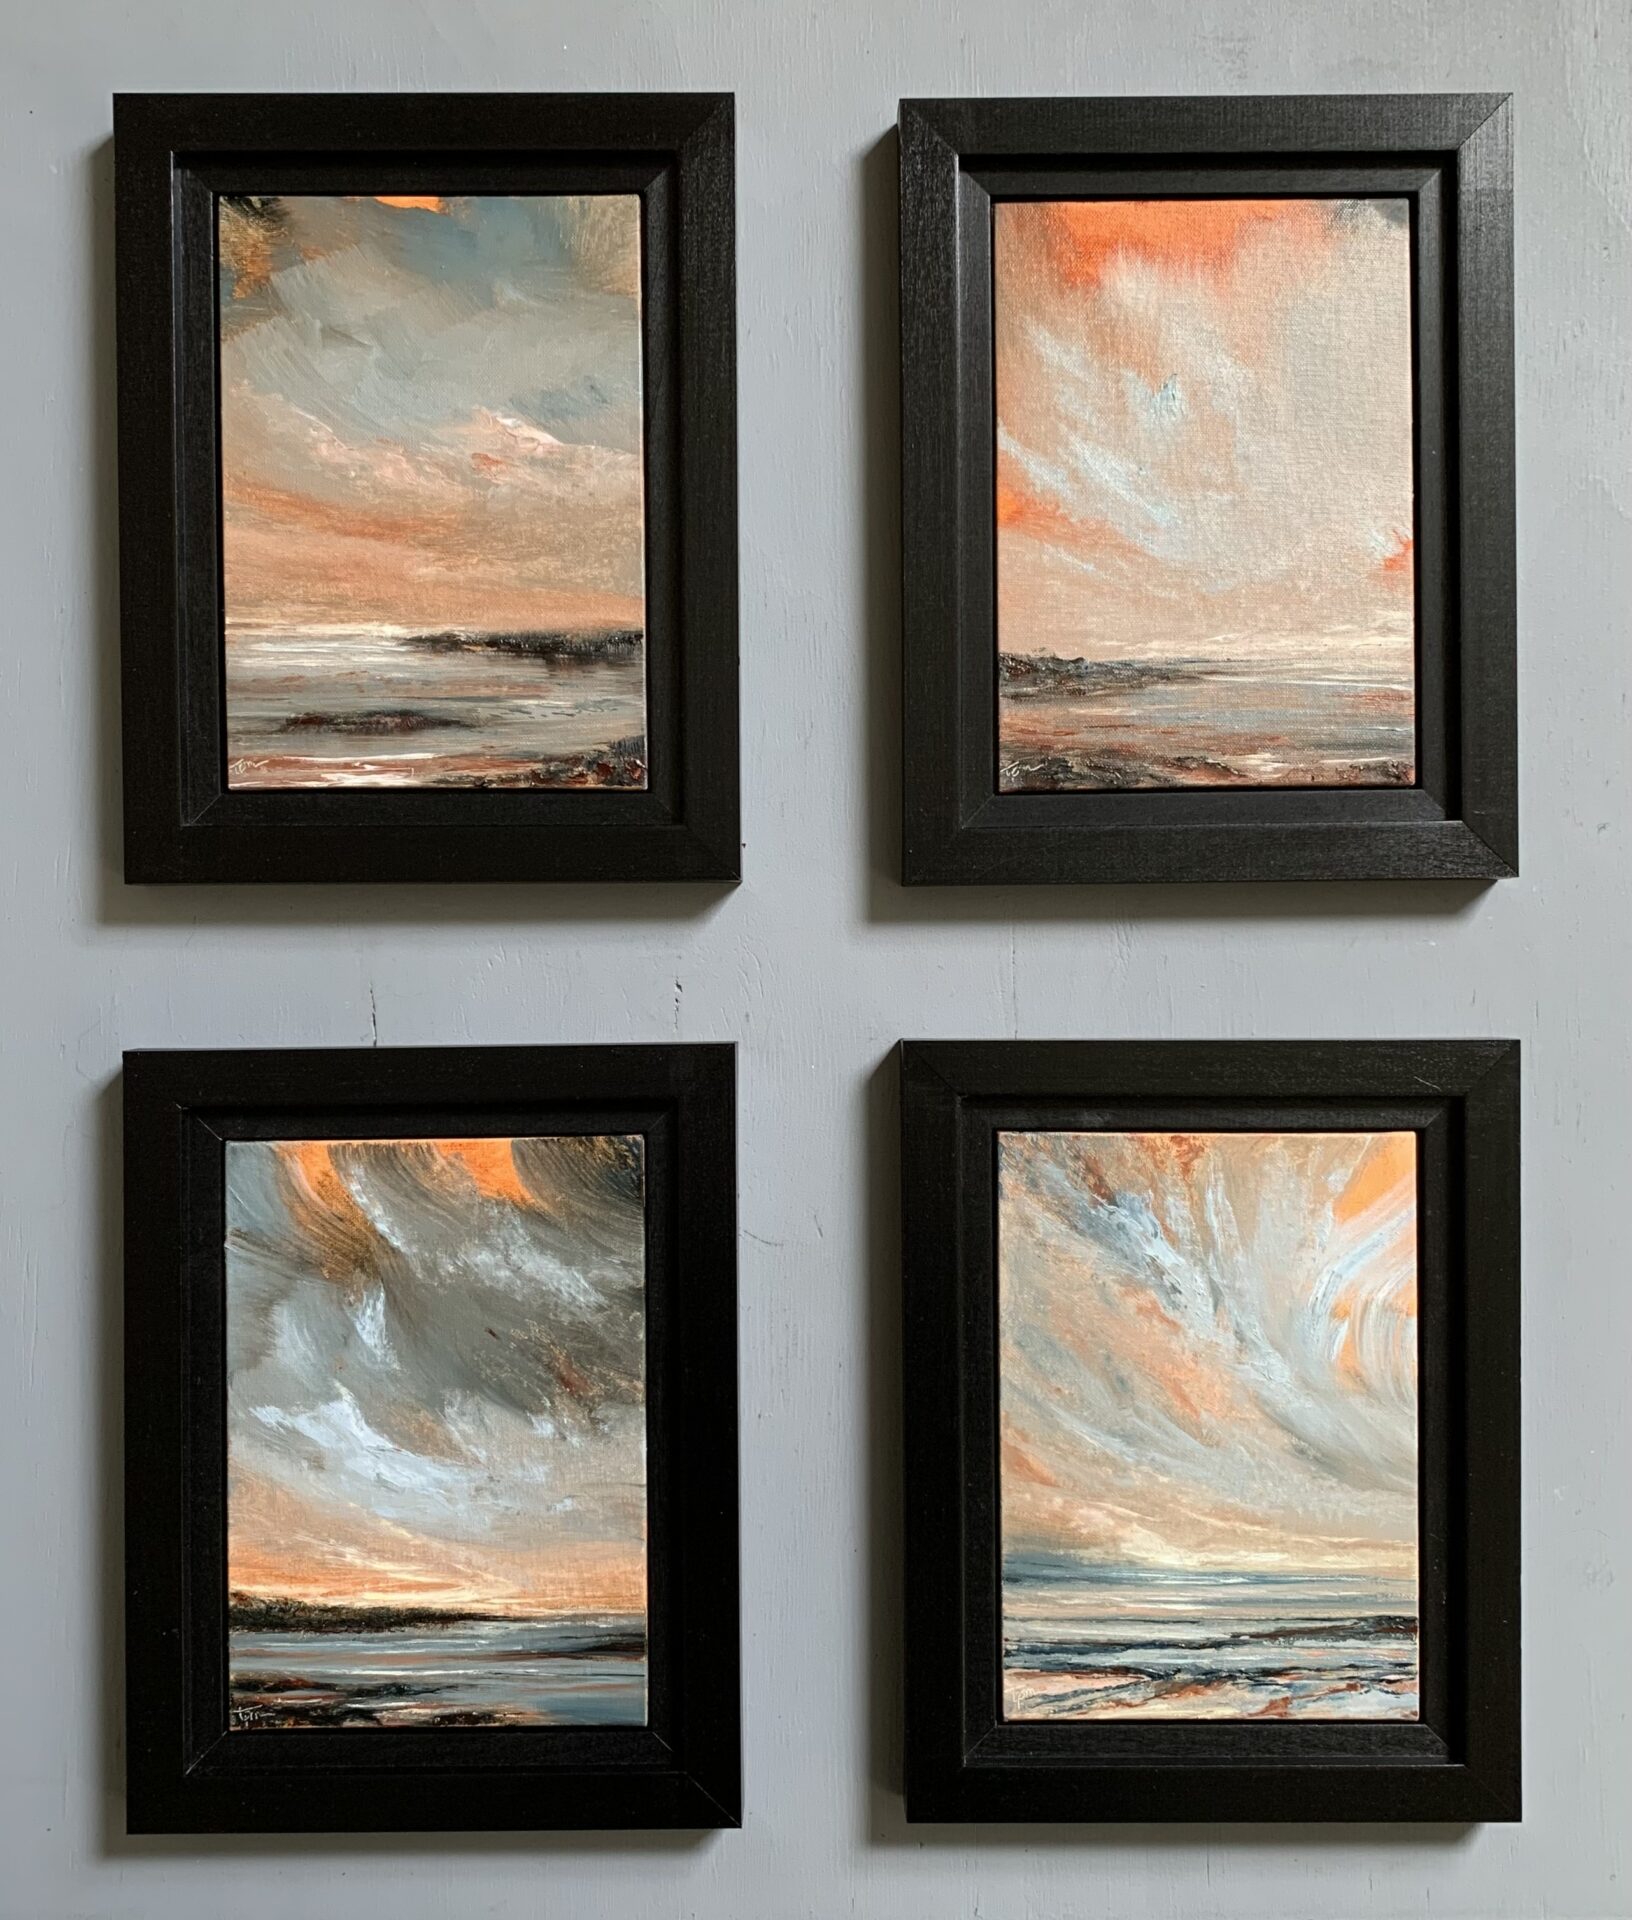 Photo of four original seascape oil paintings by Tisha Mark. The paintings feature an orange-toned sunset sky with cloud formations, and light reflecting in the water of a rocky coast below. Shown here in black frames against a gray background.